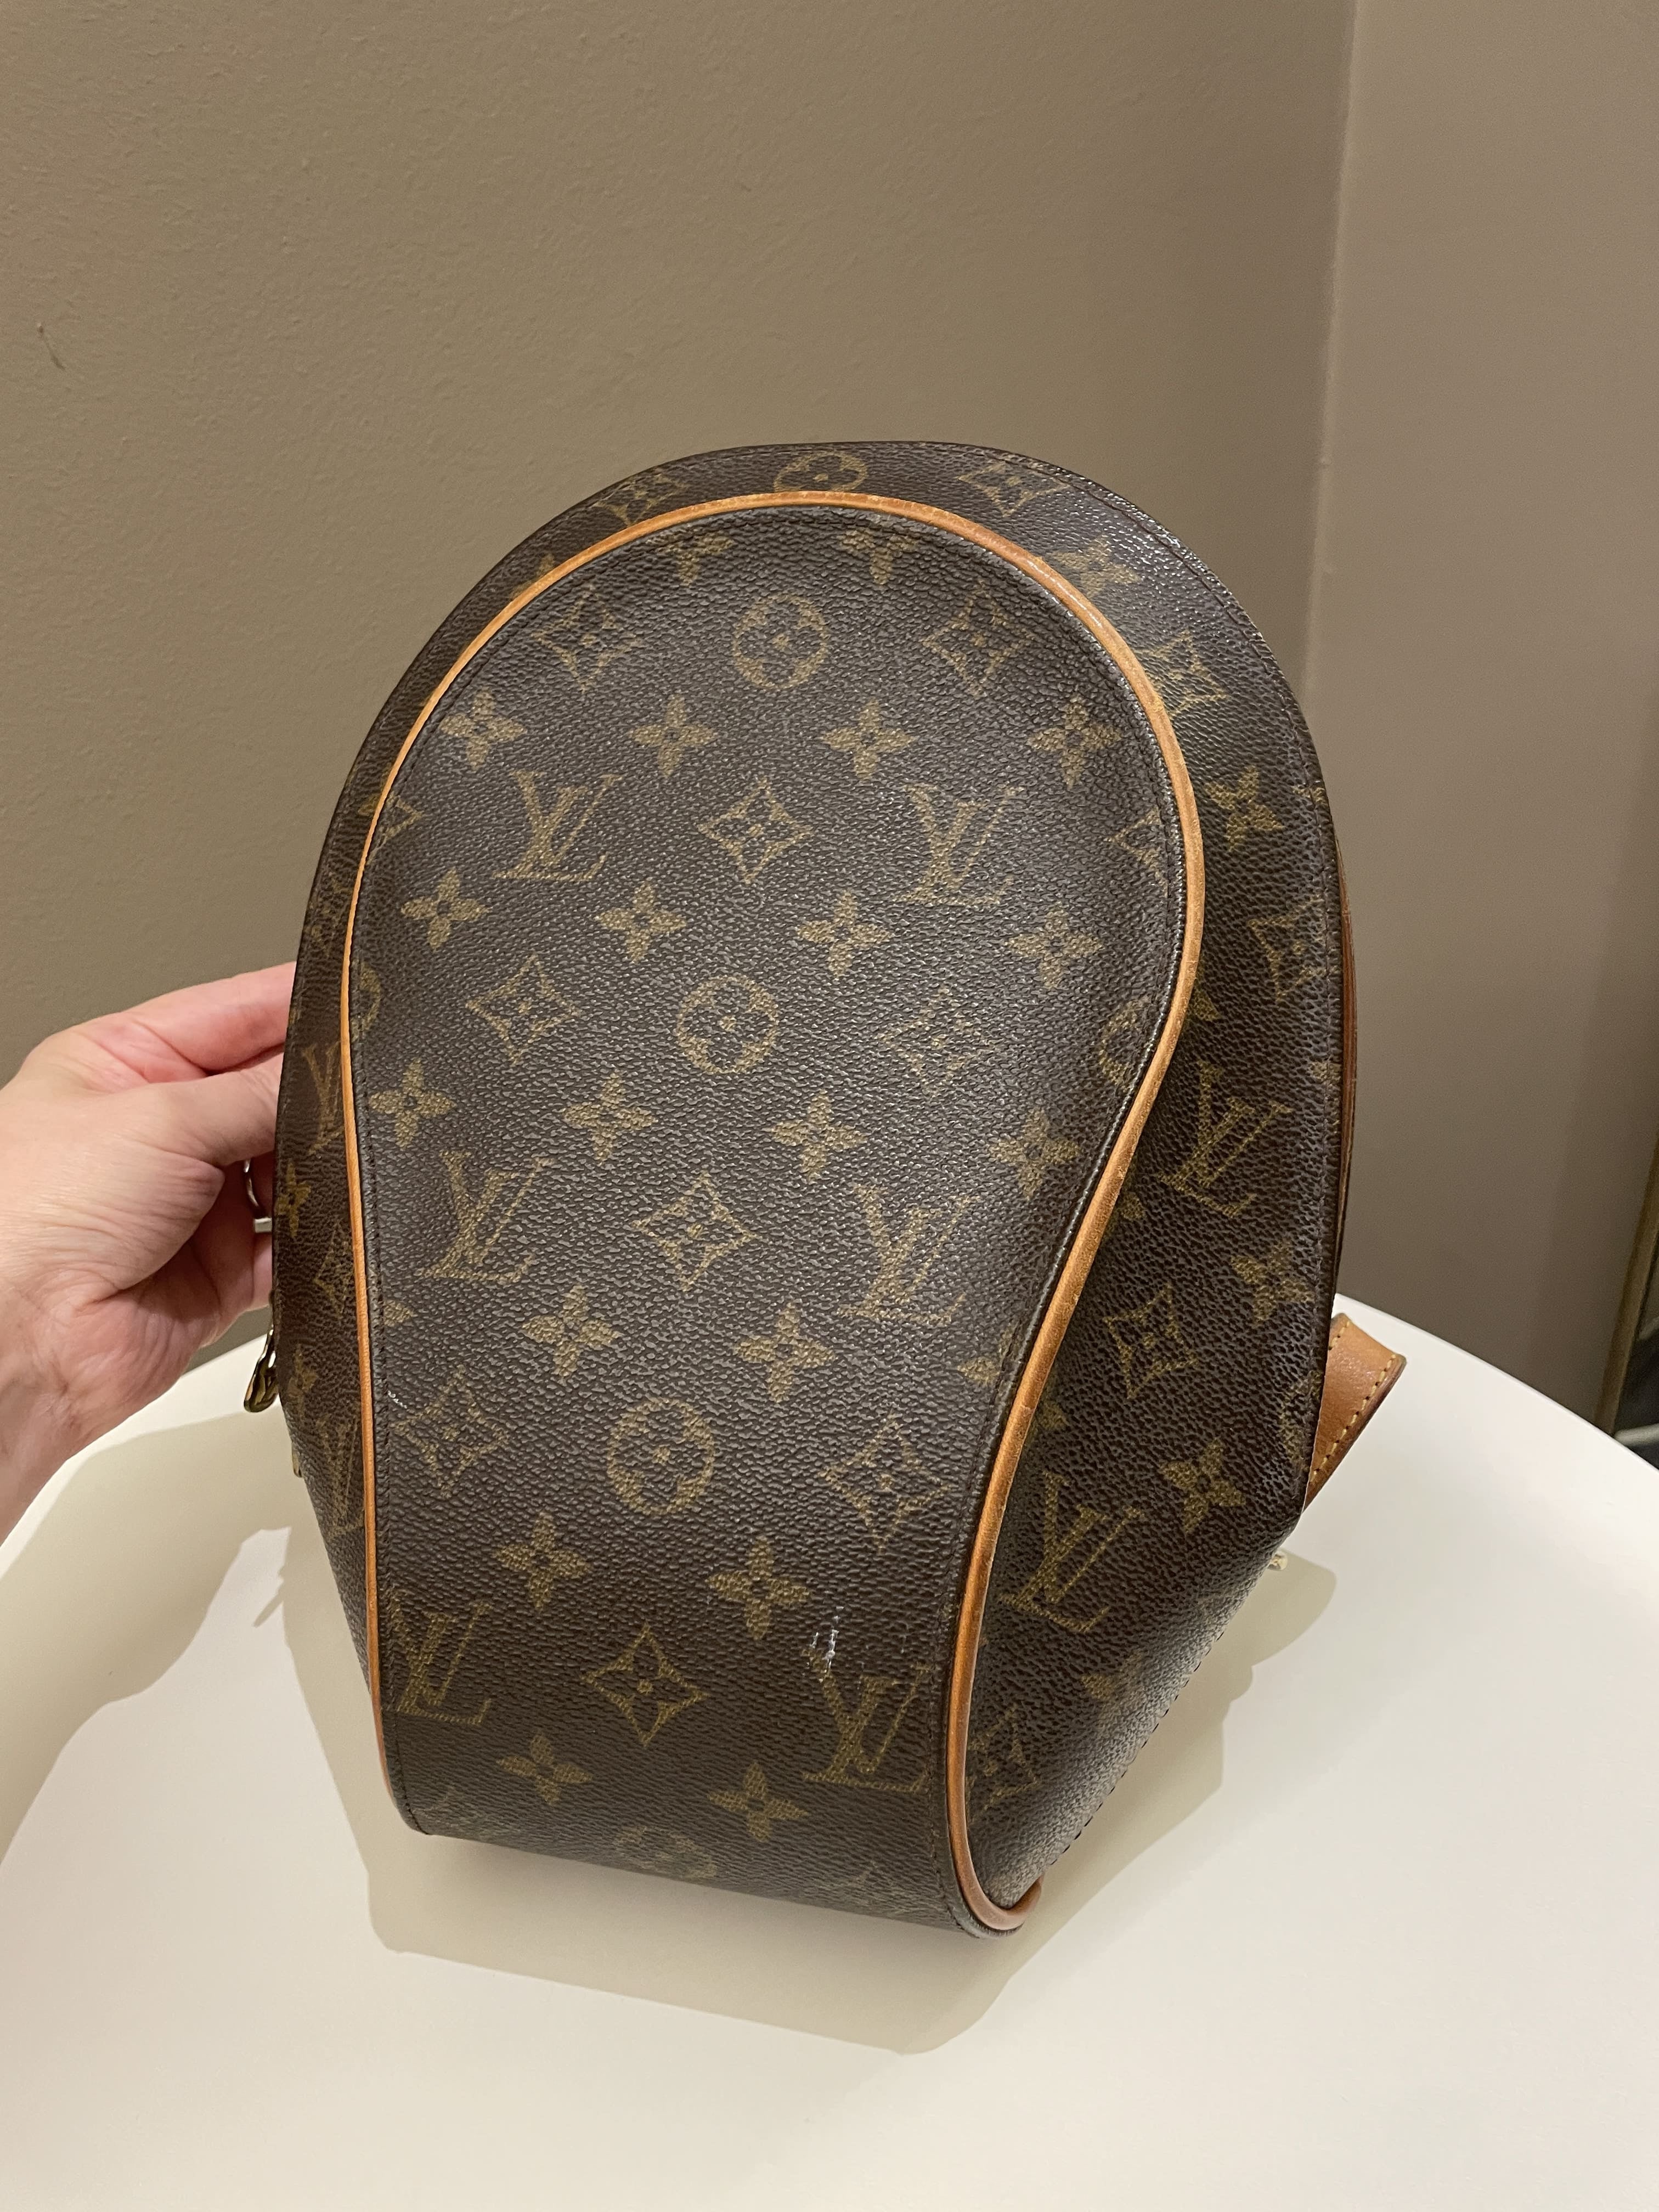 vuitton ellipse sac a dos backpack